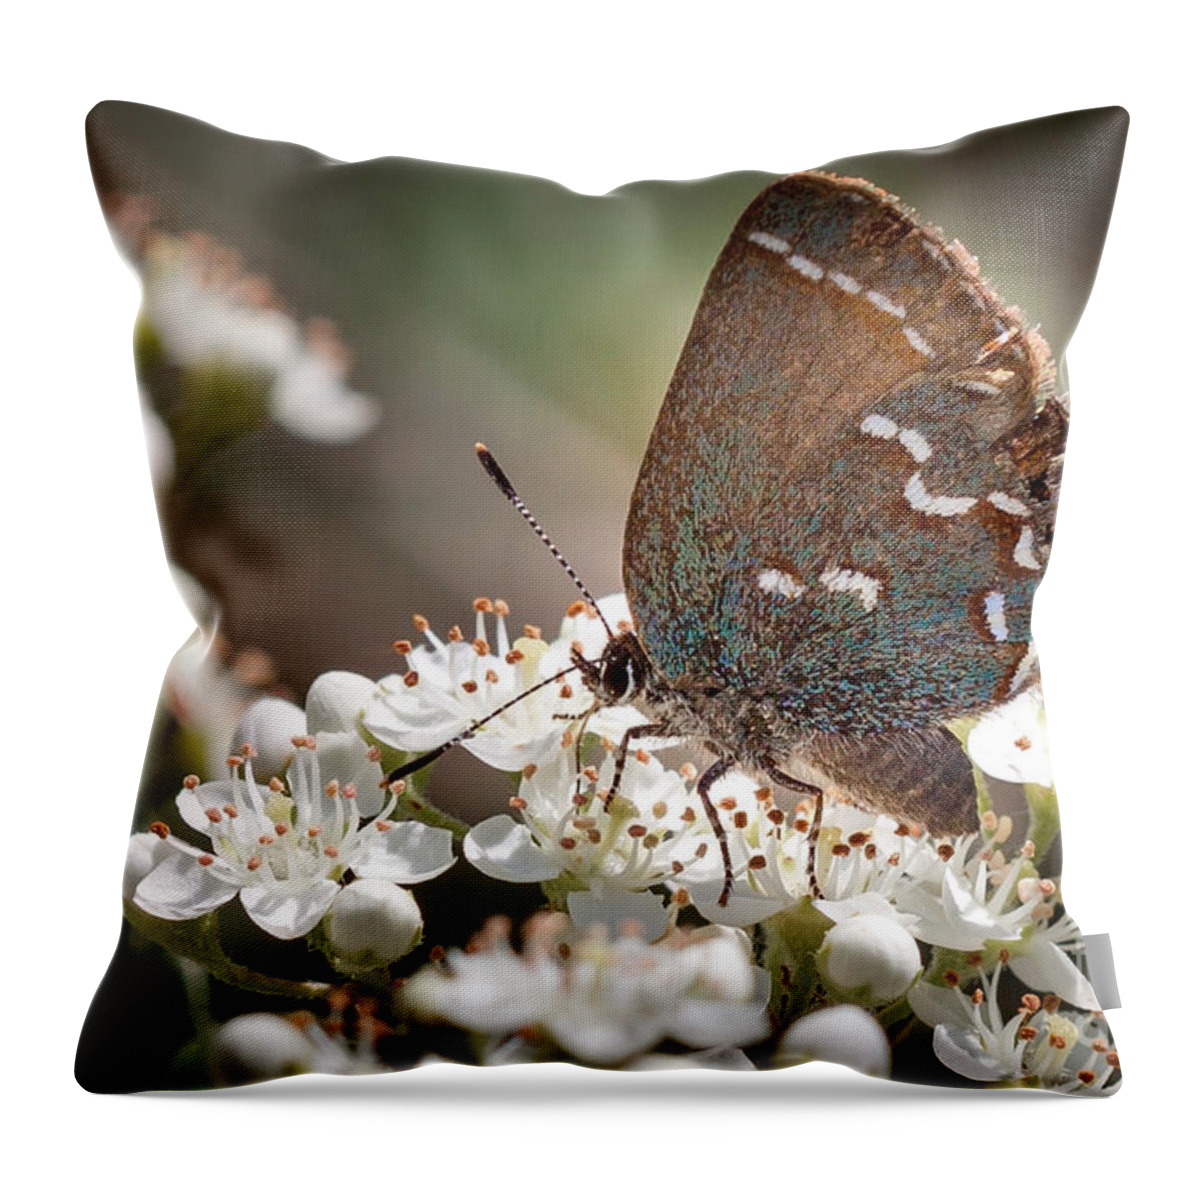 Flowers Throw Pillow featuring the photograph Butterfly In The Garden by Todd Blanchard